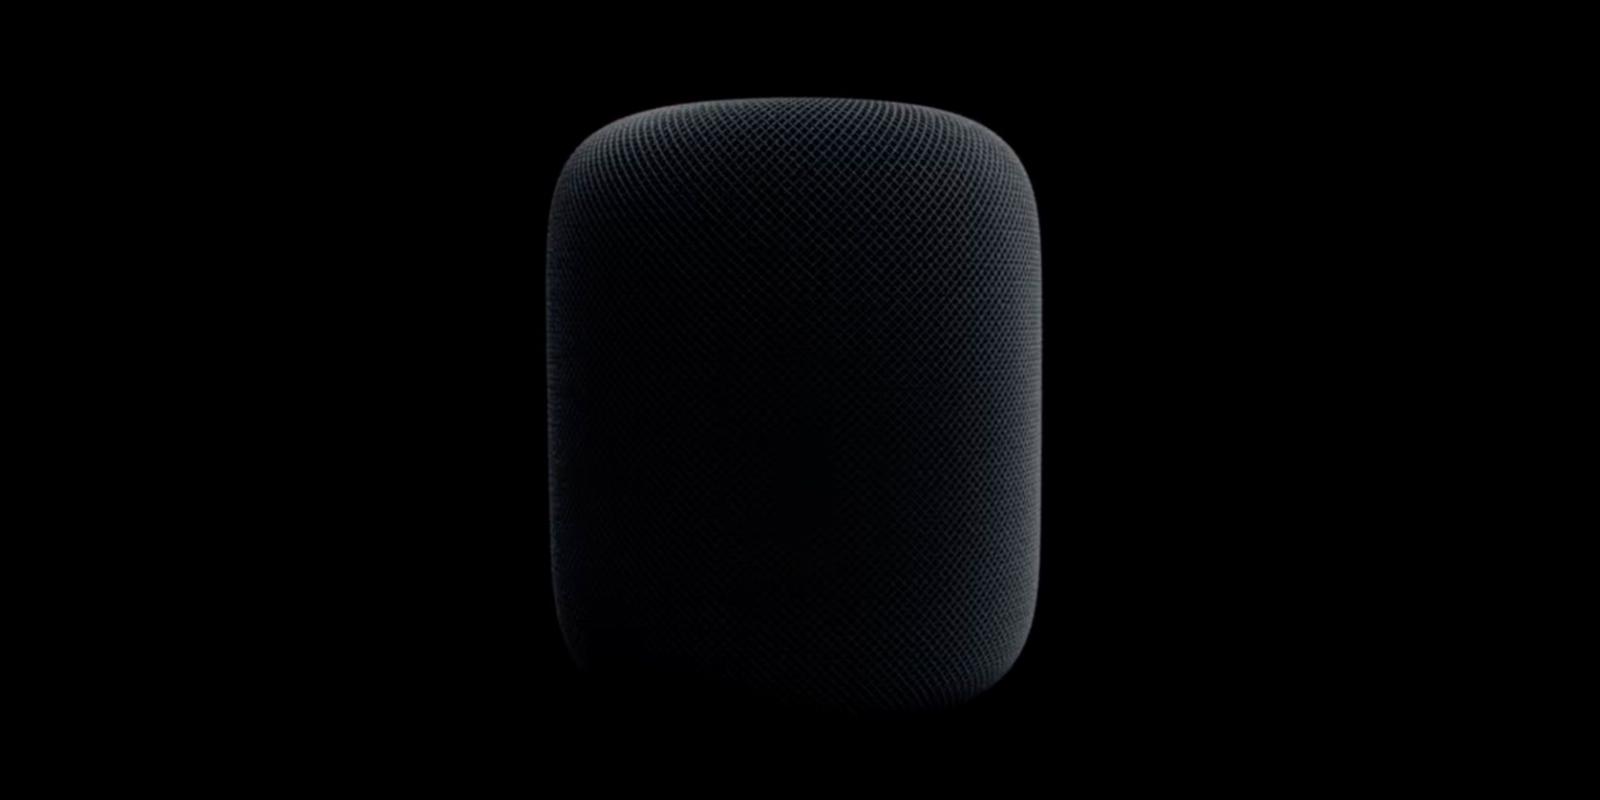 Apple’s New Full-Sized HomePod Offers More Smart Home Prowess